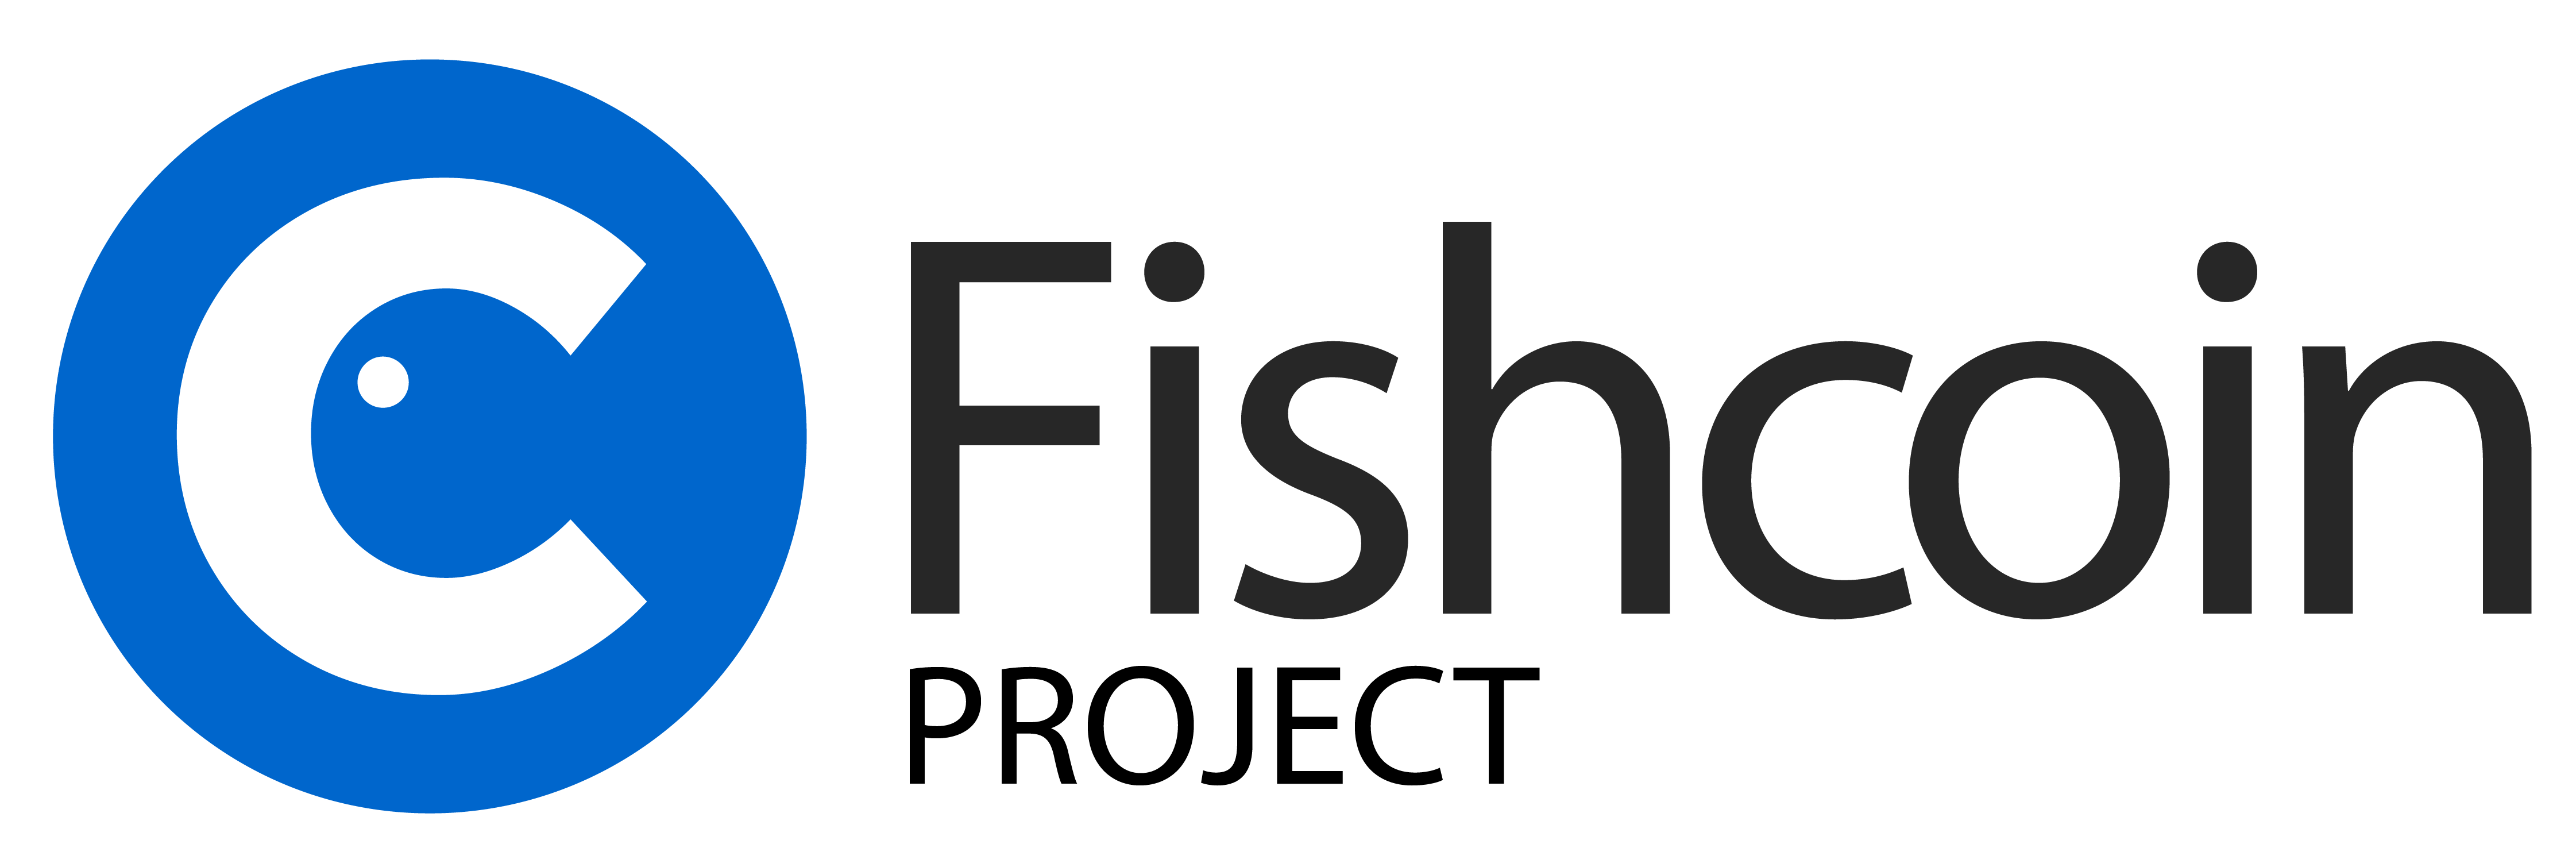 Fishcoin Project - Seafood Traceability